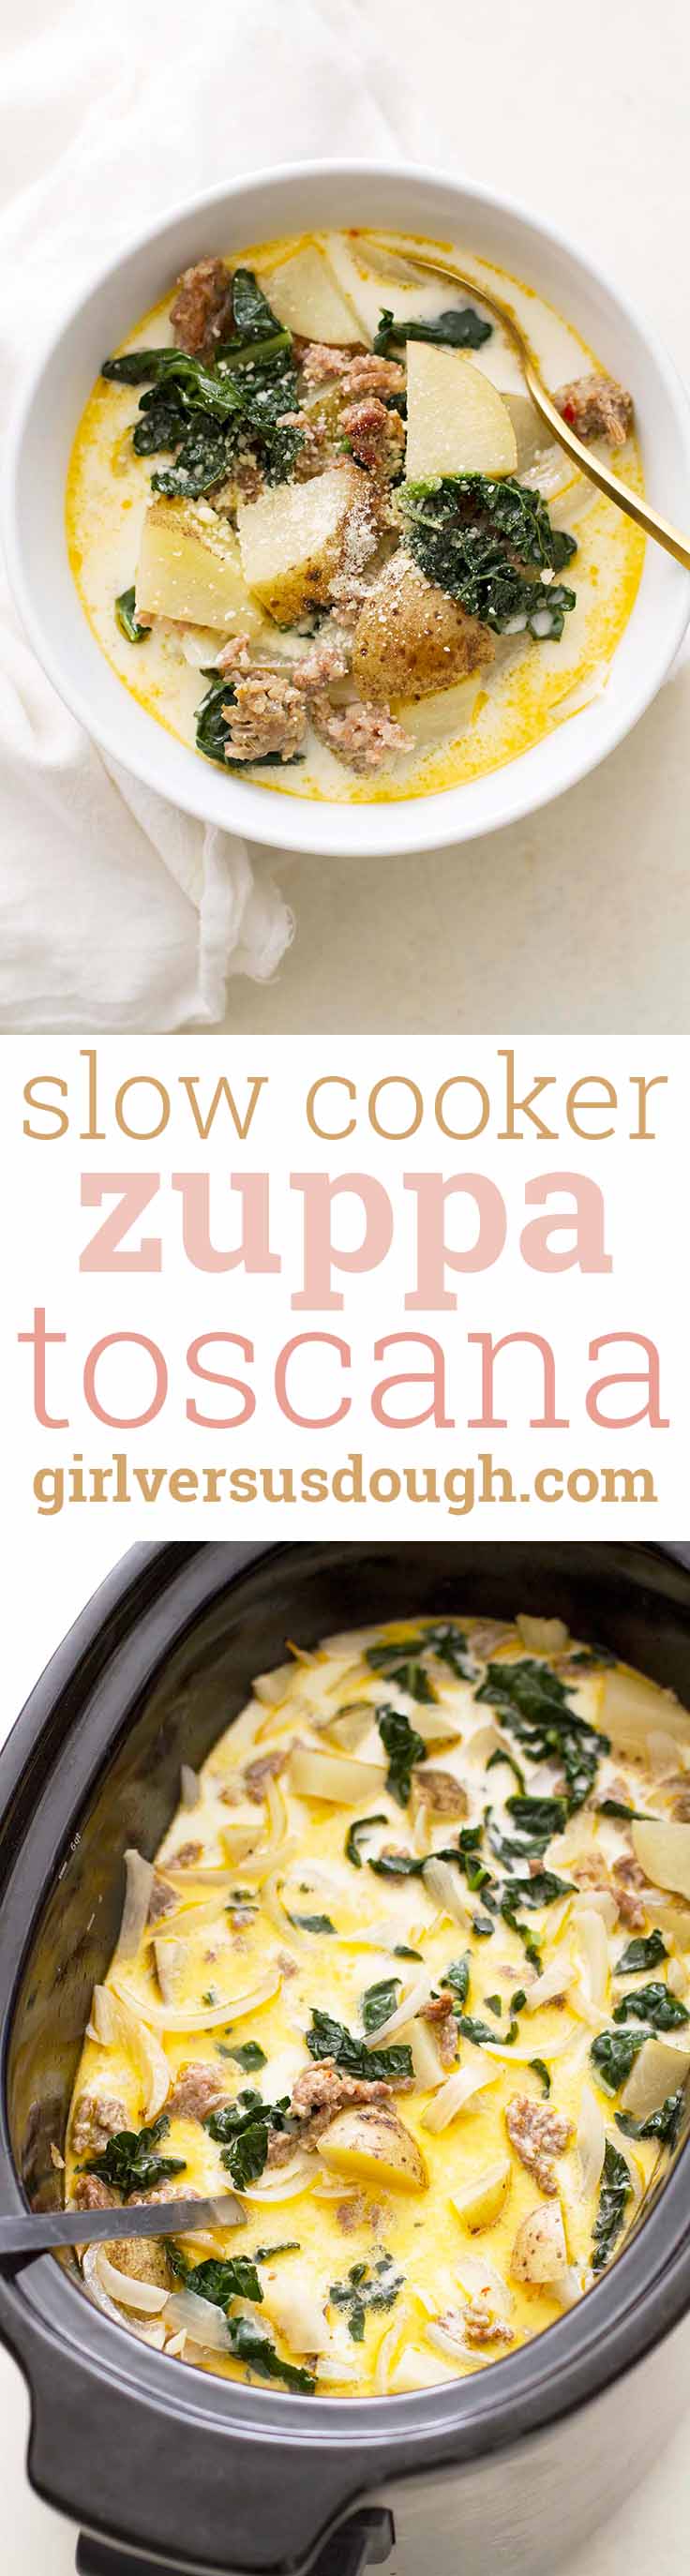 Slow Cooker Zuppa Toscana -- break out the crock pot for this comfort food! A simple and satisfying soup made in the slow cooker with Italian sausage, potatoes, kale and cream. www.girlversusdough.com @girlversusdough